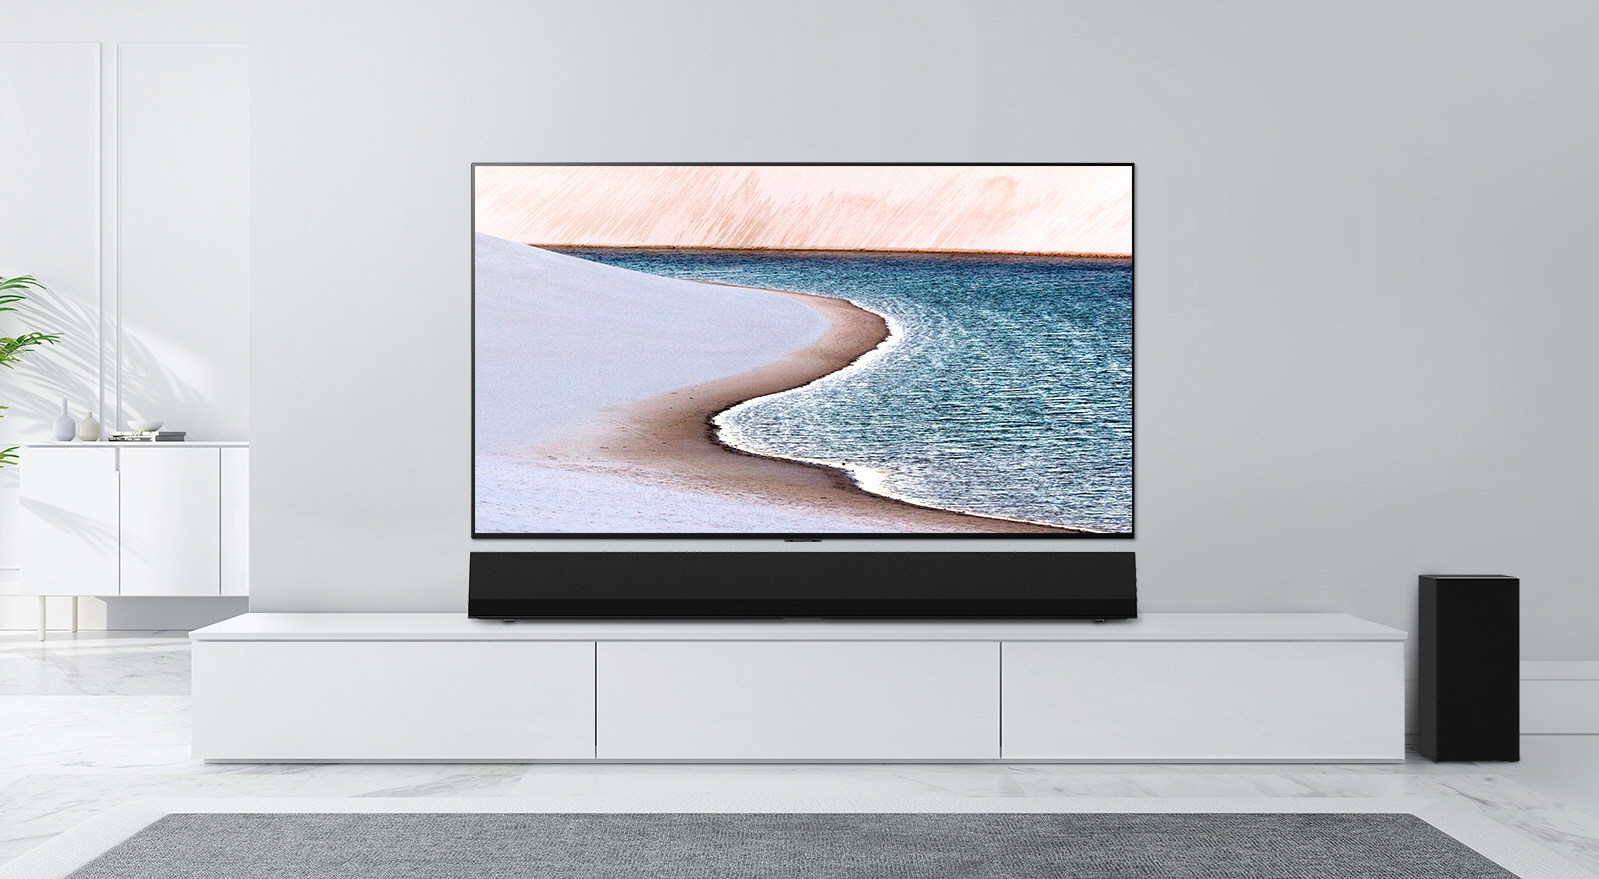 LG unveils latest soundbar as the "perfect companion" the GX Gallery of OLED TVs NotebookCheck.net News